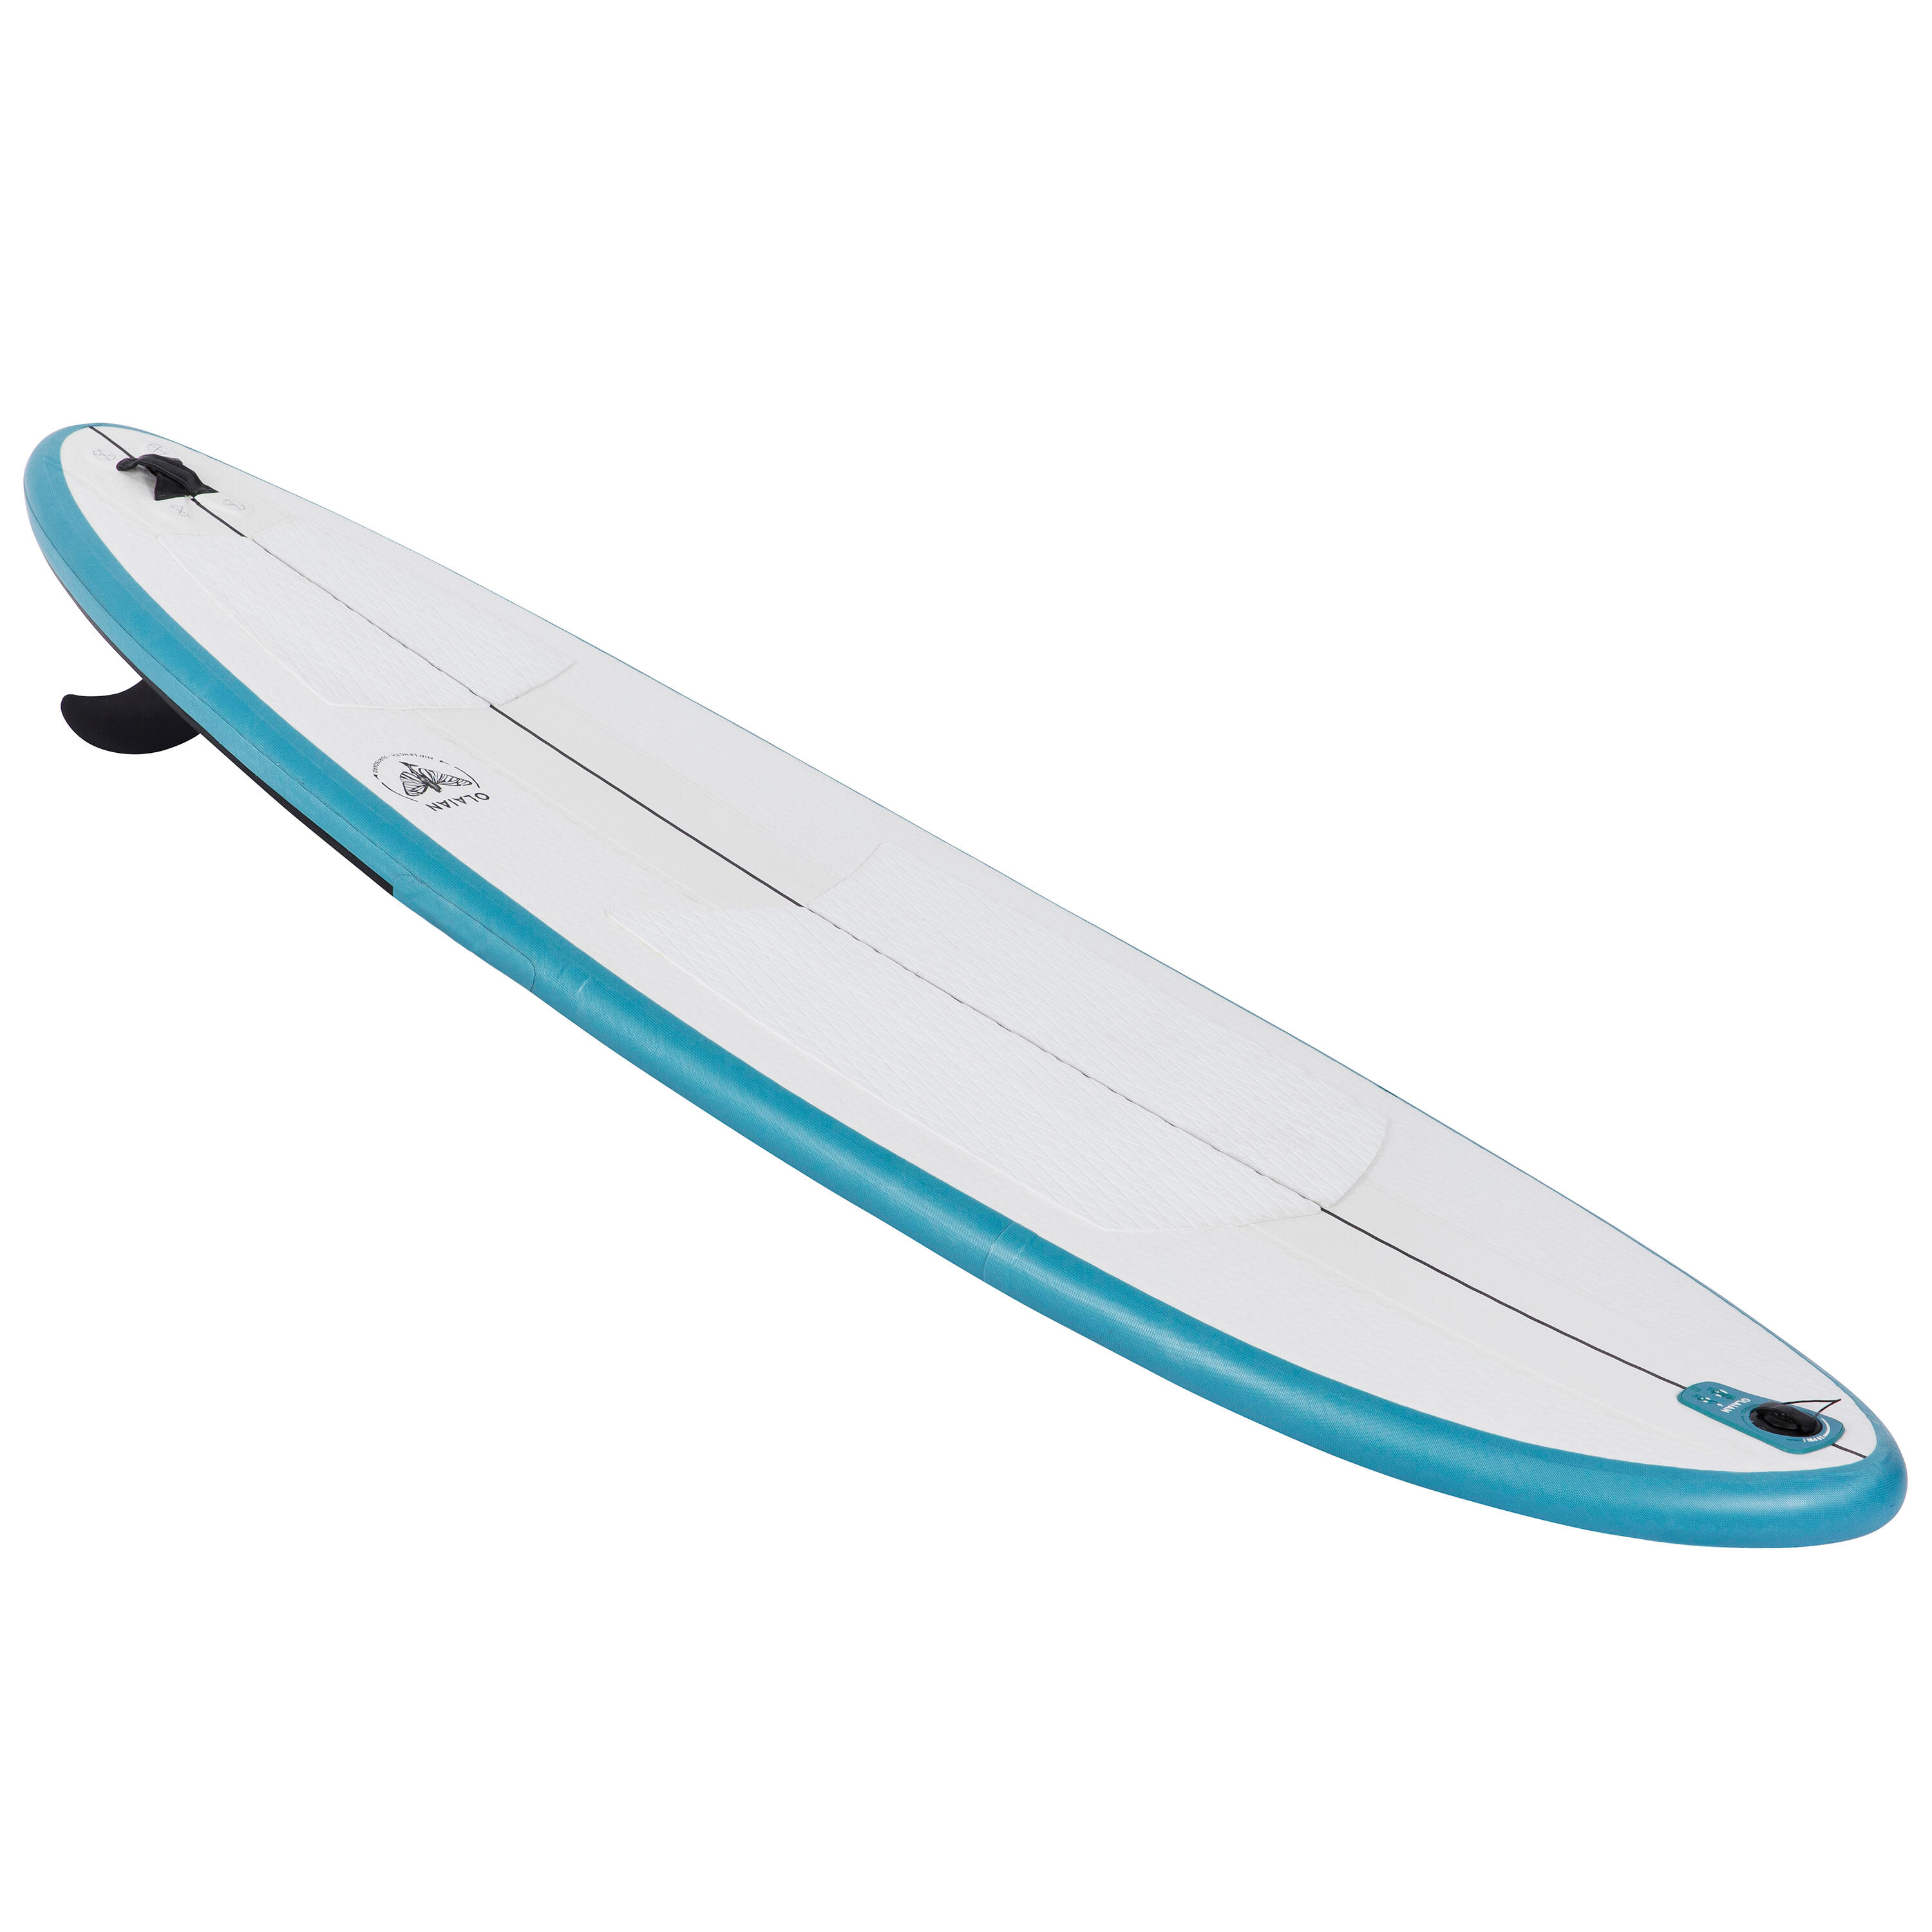 Compact inflatable surfboard 500 6'6” (without pump or leash) 5/14